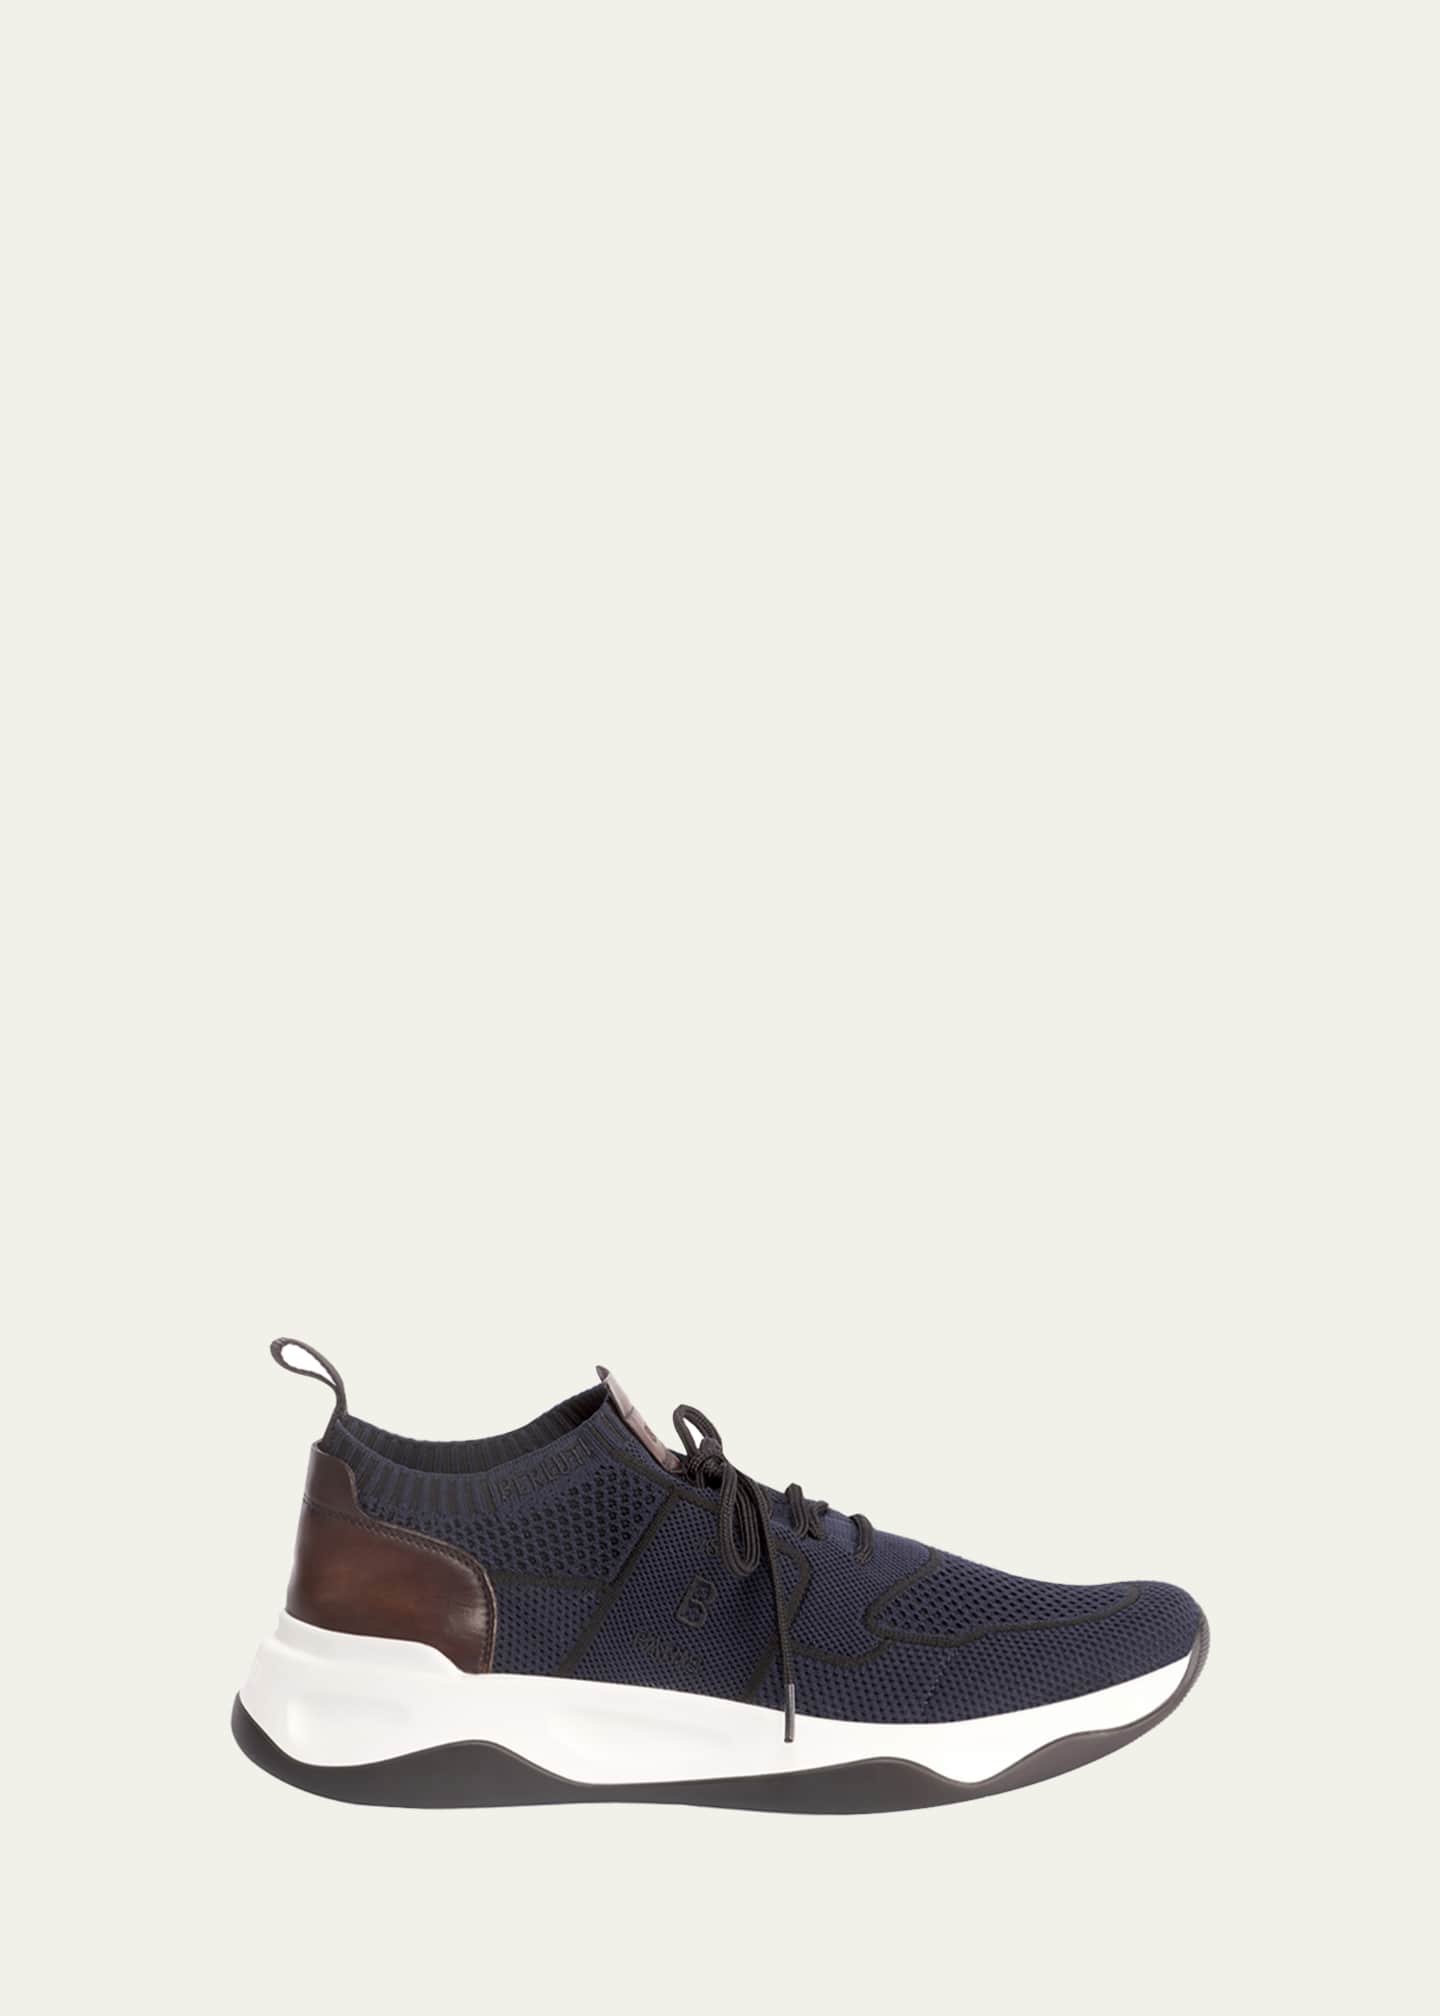 Berluti Men's Shadow Knit Sneaker with Leather Details - Bergdorf